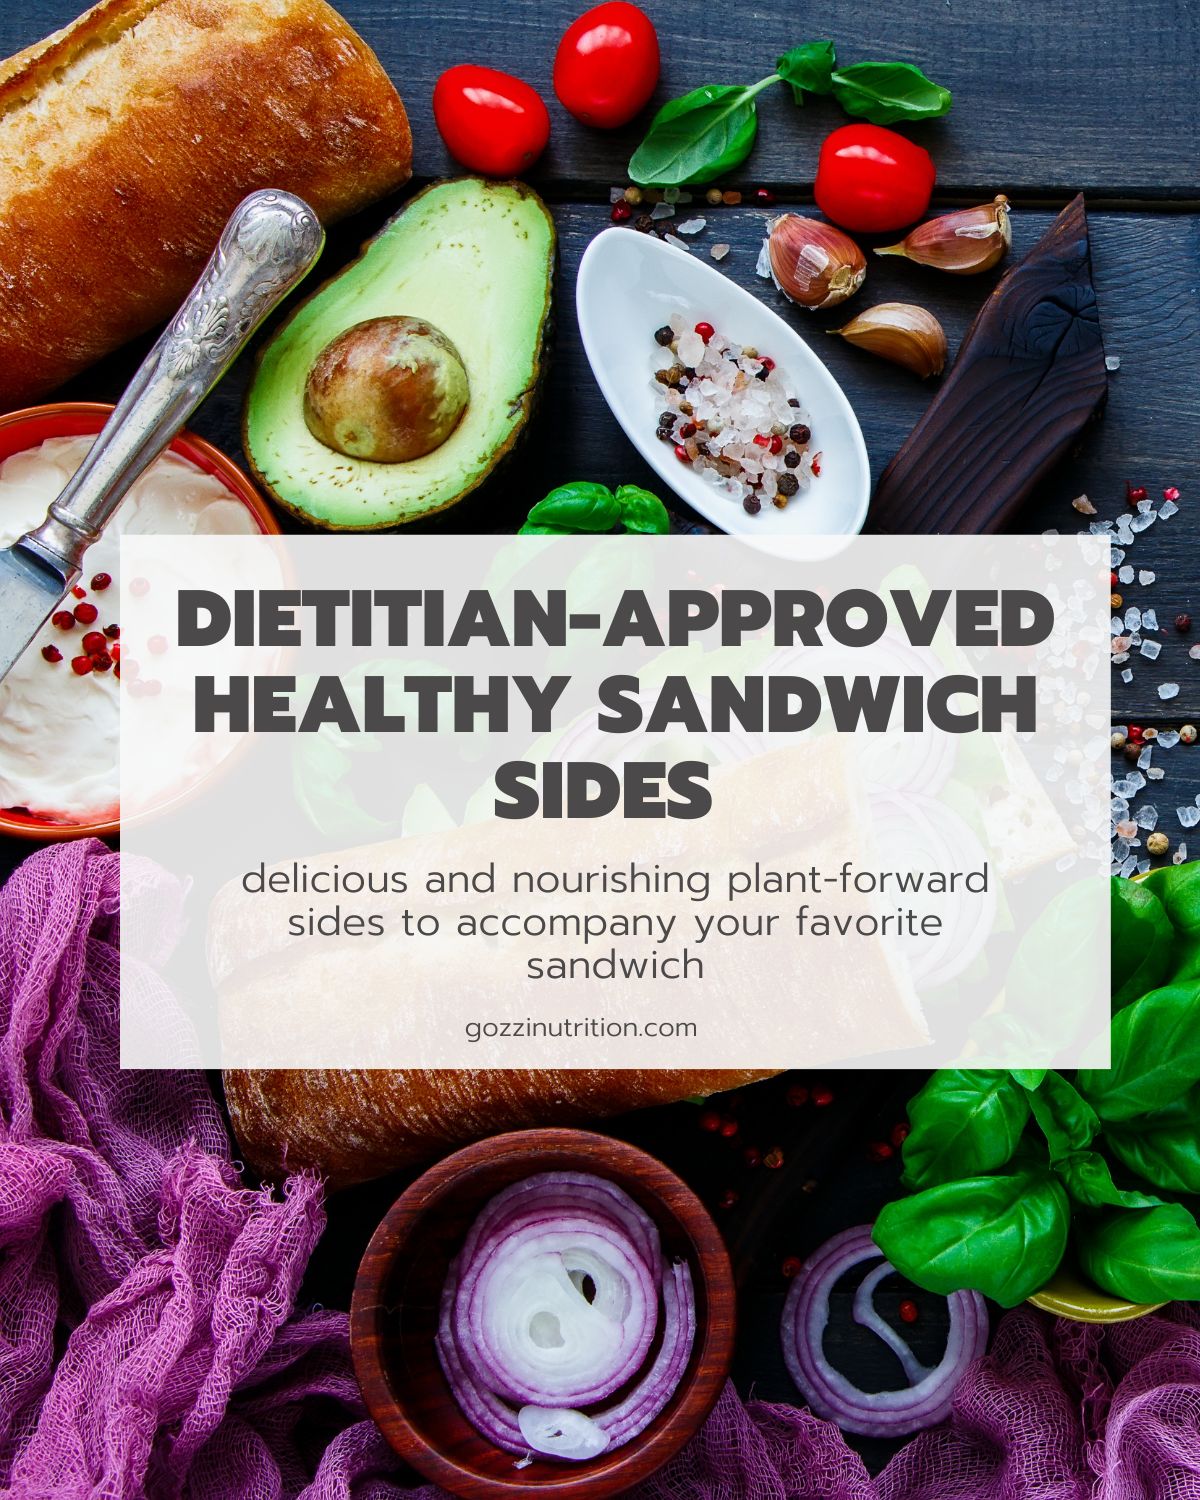 this is a blog post about healthy sandwich sides written by a registered dietitian